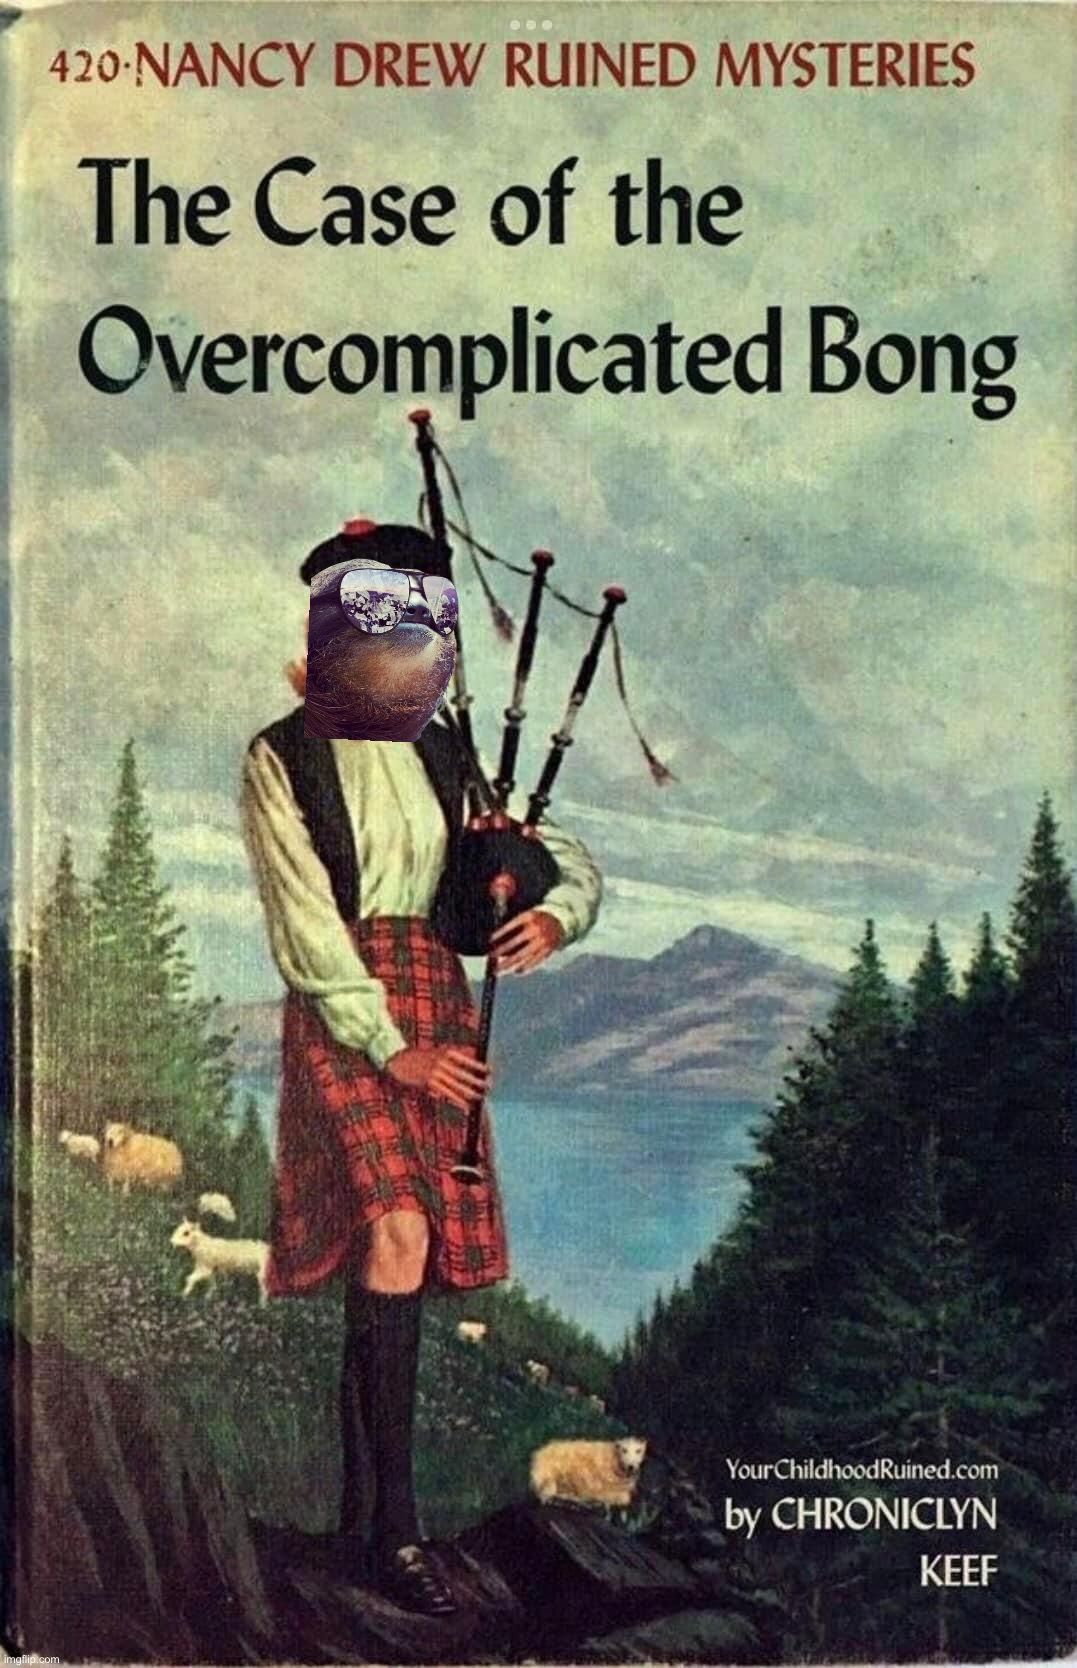 Nancy Drew overcomplicated bong | image tagged in nancy drew overcomplicated bong | made w/ Imgflip meme maker